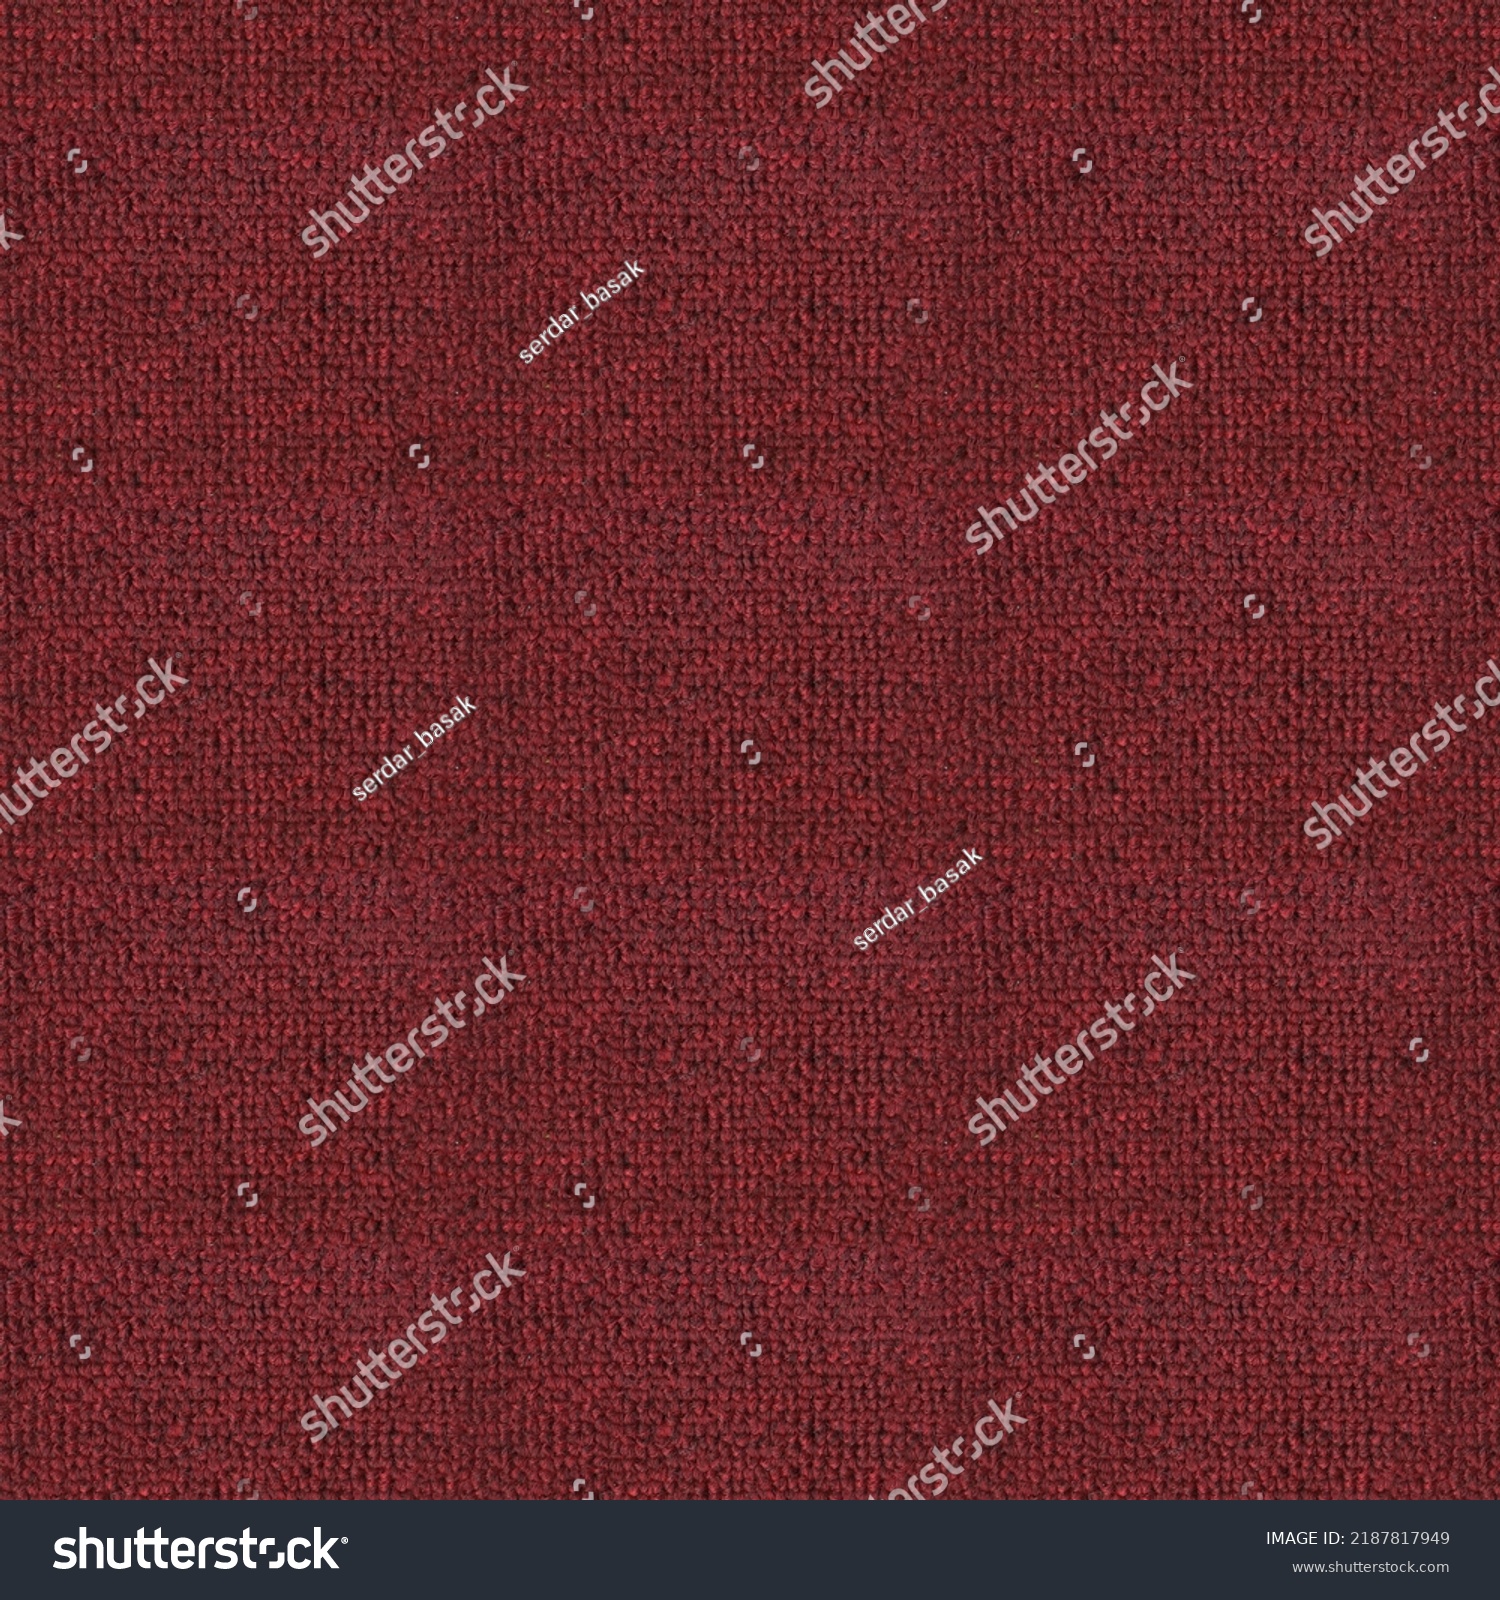 Seamless Red Carpet Rug Texture Background Stock Photo 2187817949